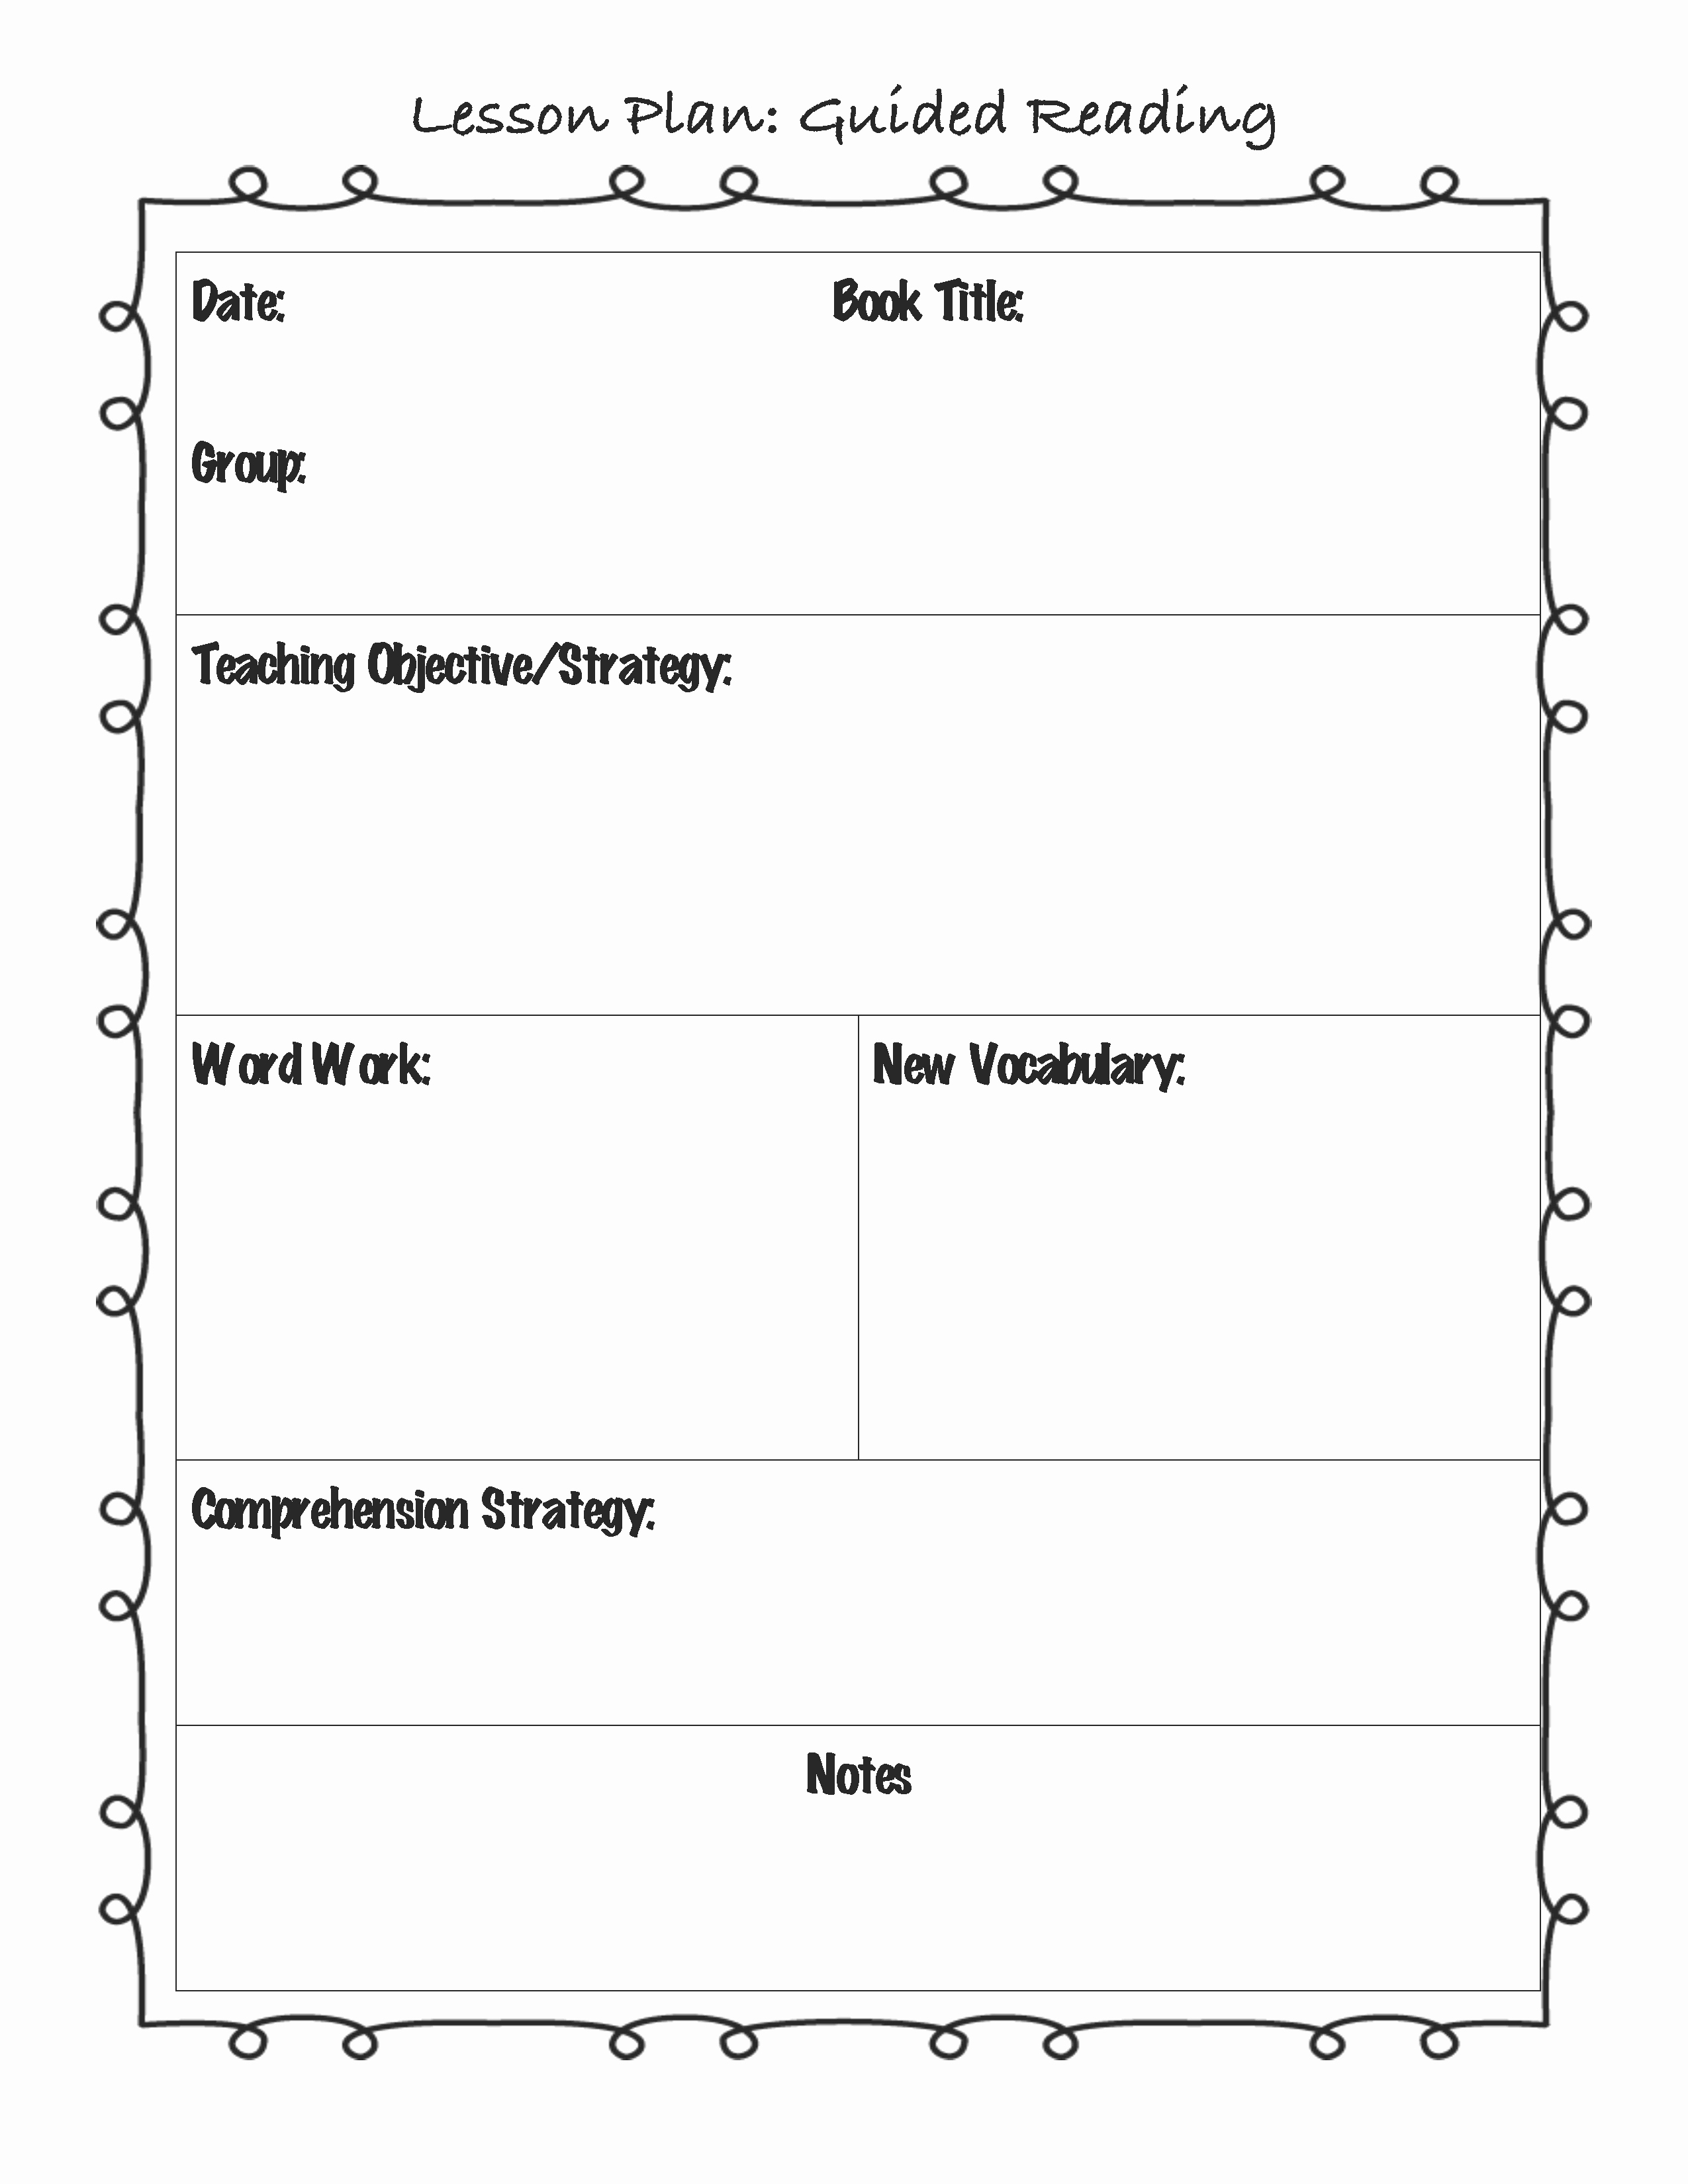 Reading Lesson Plan Template Unique Guided Reading Lesson Plan Template